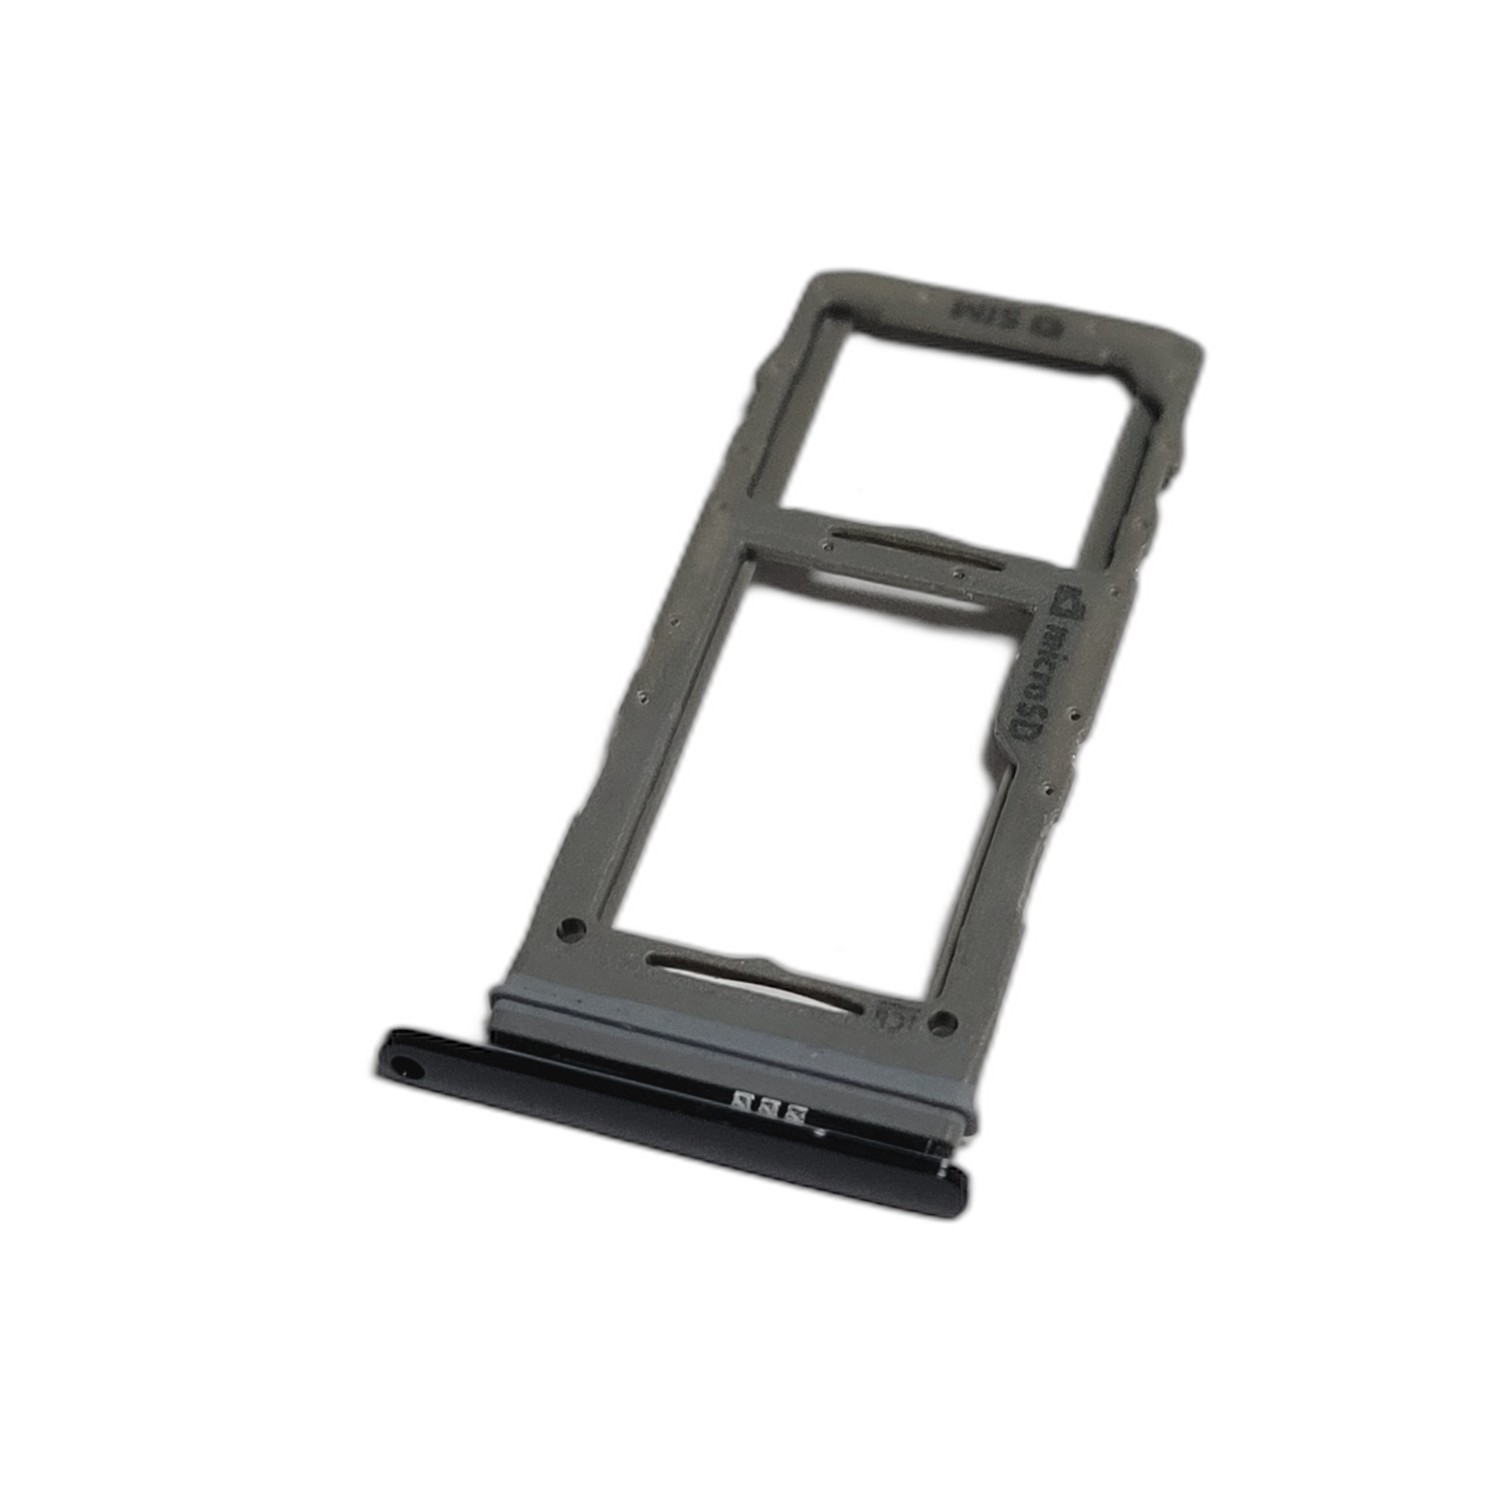 Samsung S20 Dual SIM Card Tray Replacement - Black | High-Quality & Durable